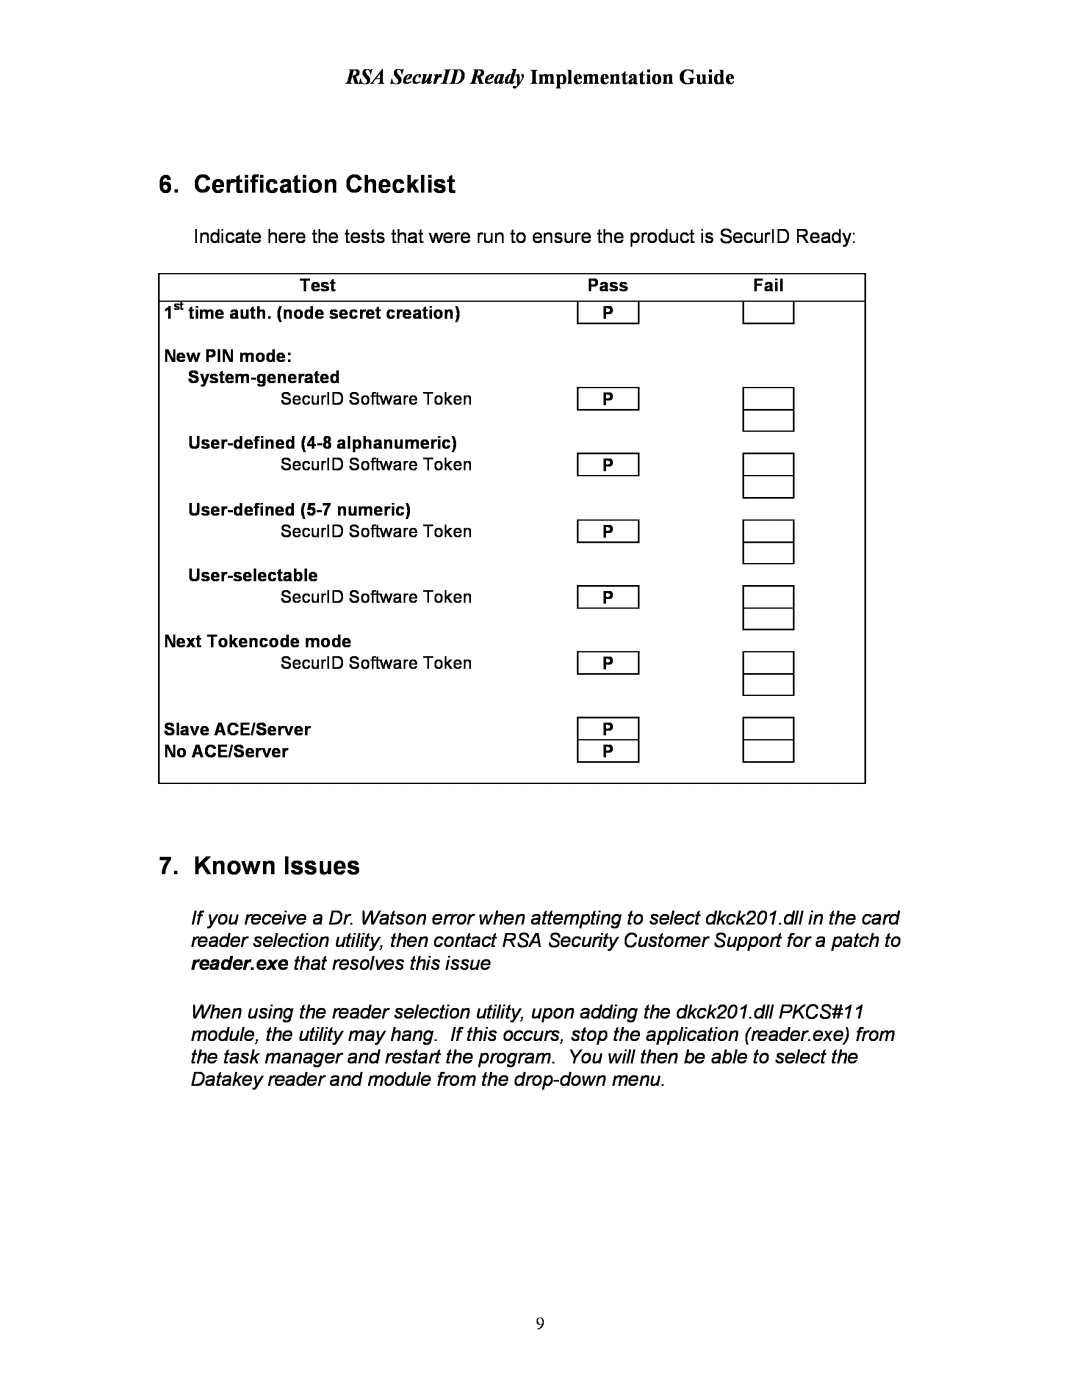 Rainbow Technologies 2000 manual Certification Checklist, Known Issues, RSA SecurID Ready Implementation Guide 